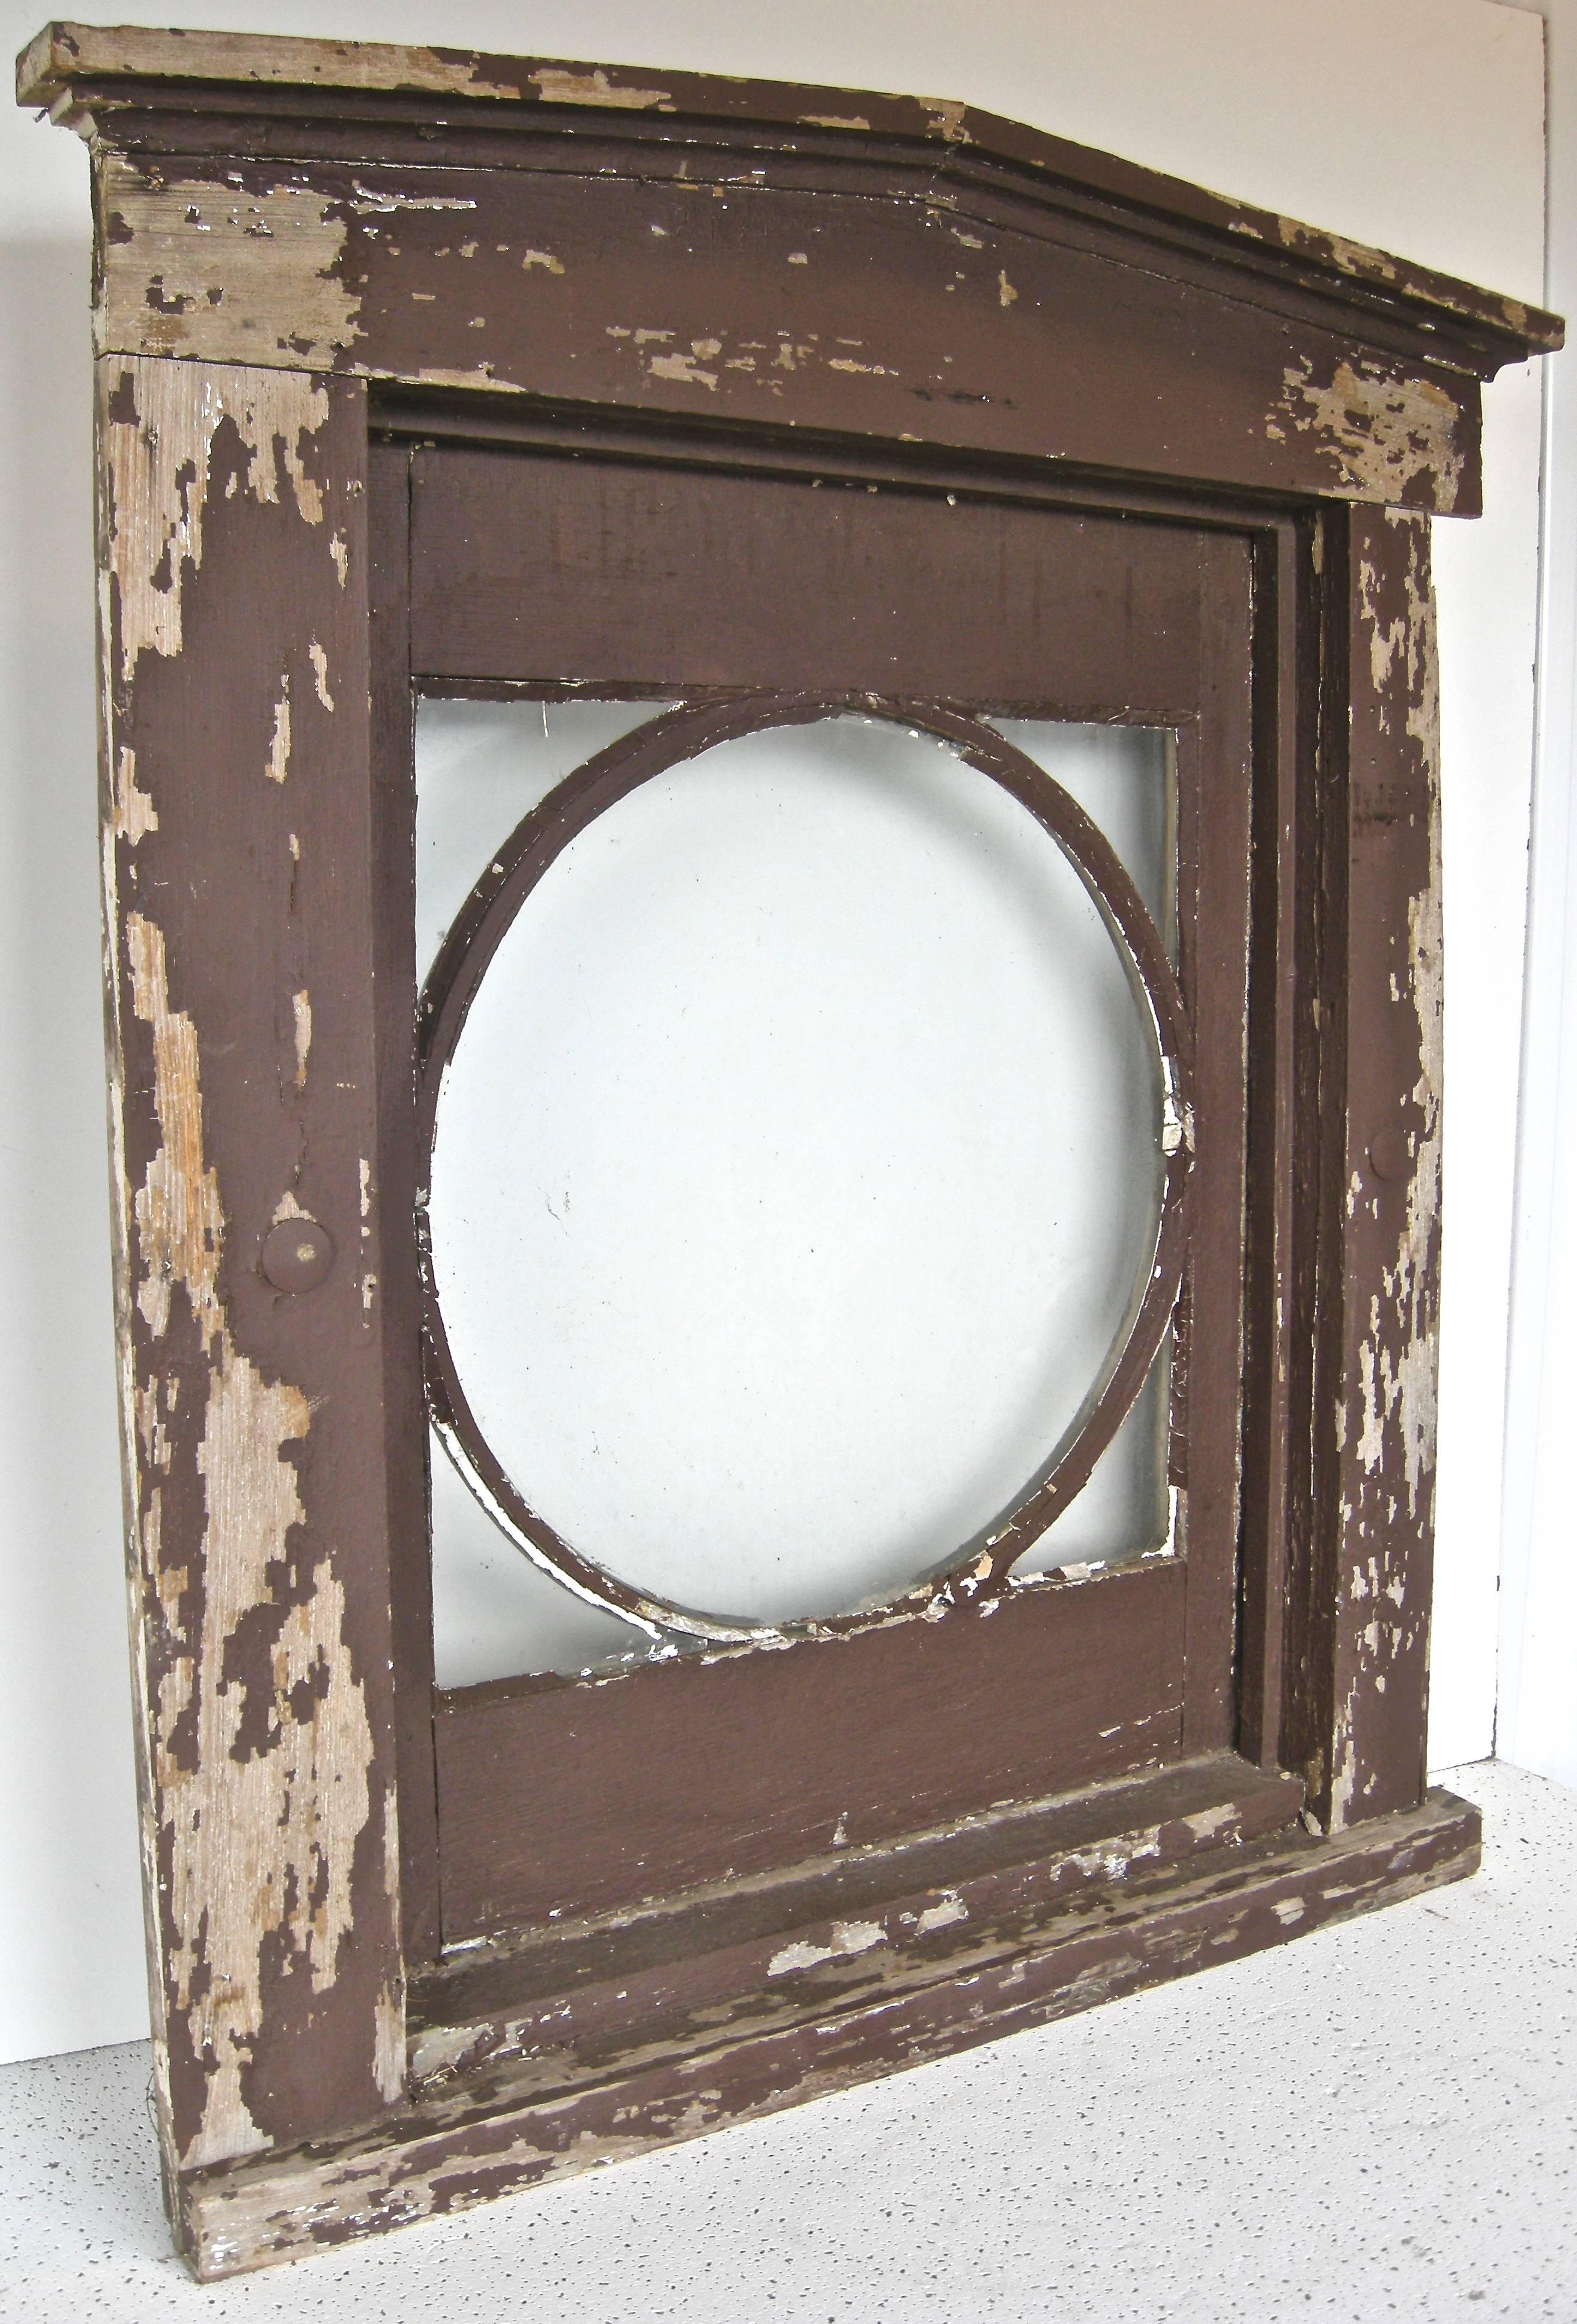 Terrific, early, classically-inspired window frame. Handcrafted having a circular focal point encased in a rectangular frame with a raised pediment top. Original glass. Early brown paint in distressed, worn and weathered overall finish. Southern